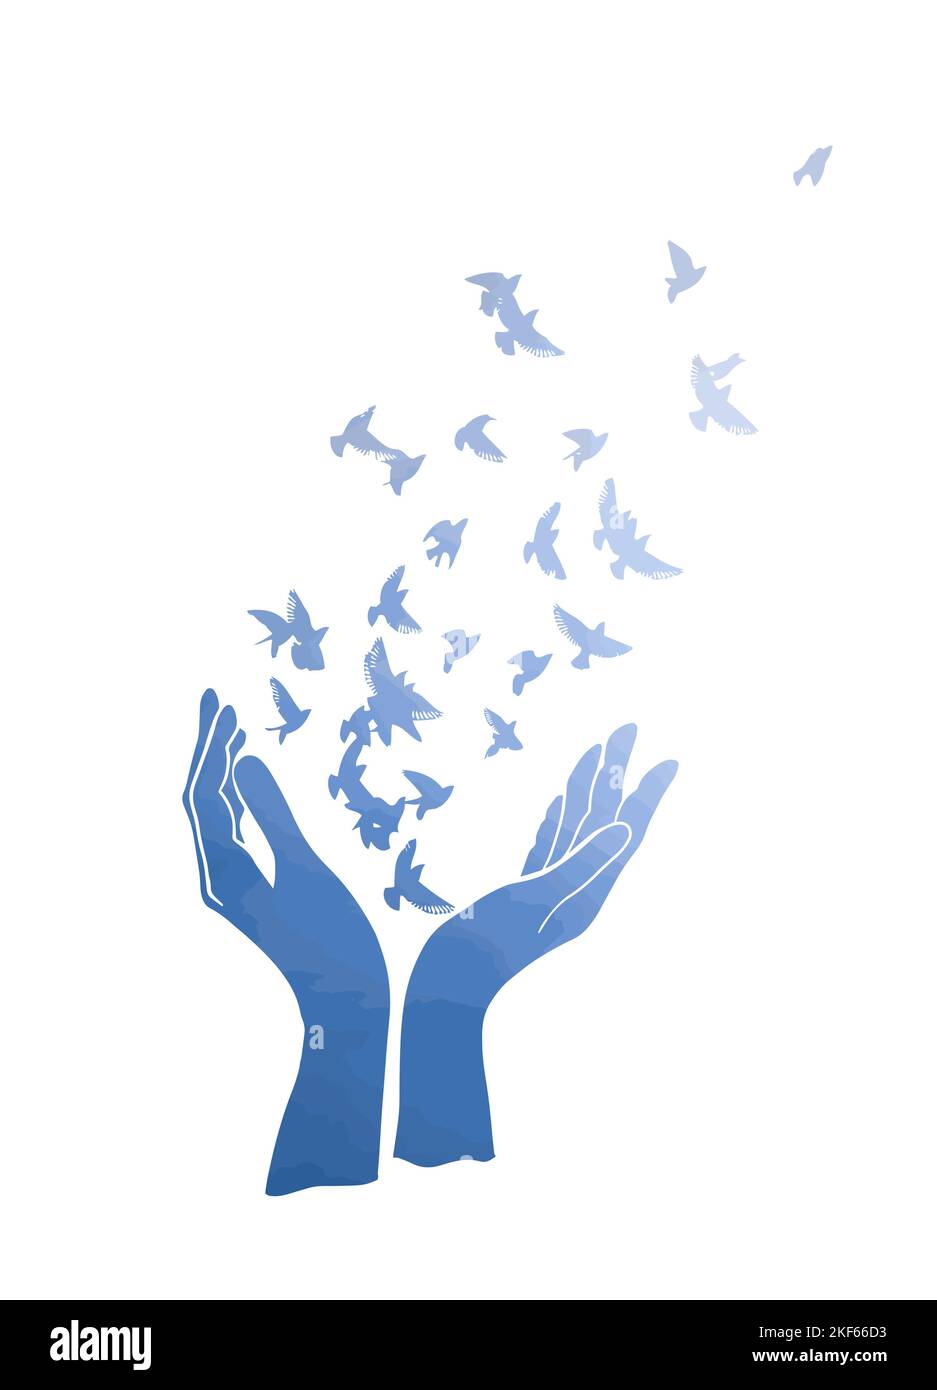 care about world. concept of world without war Blue hands and dove. Vector illustration Stock Vector